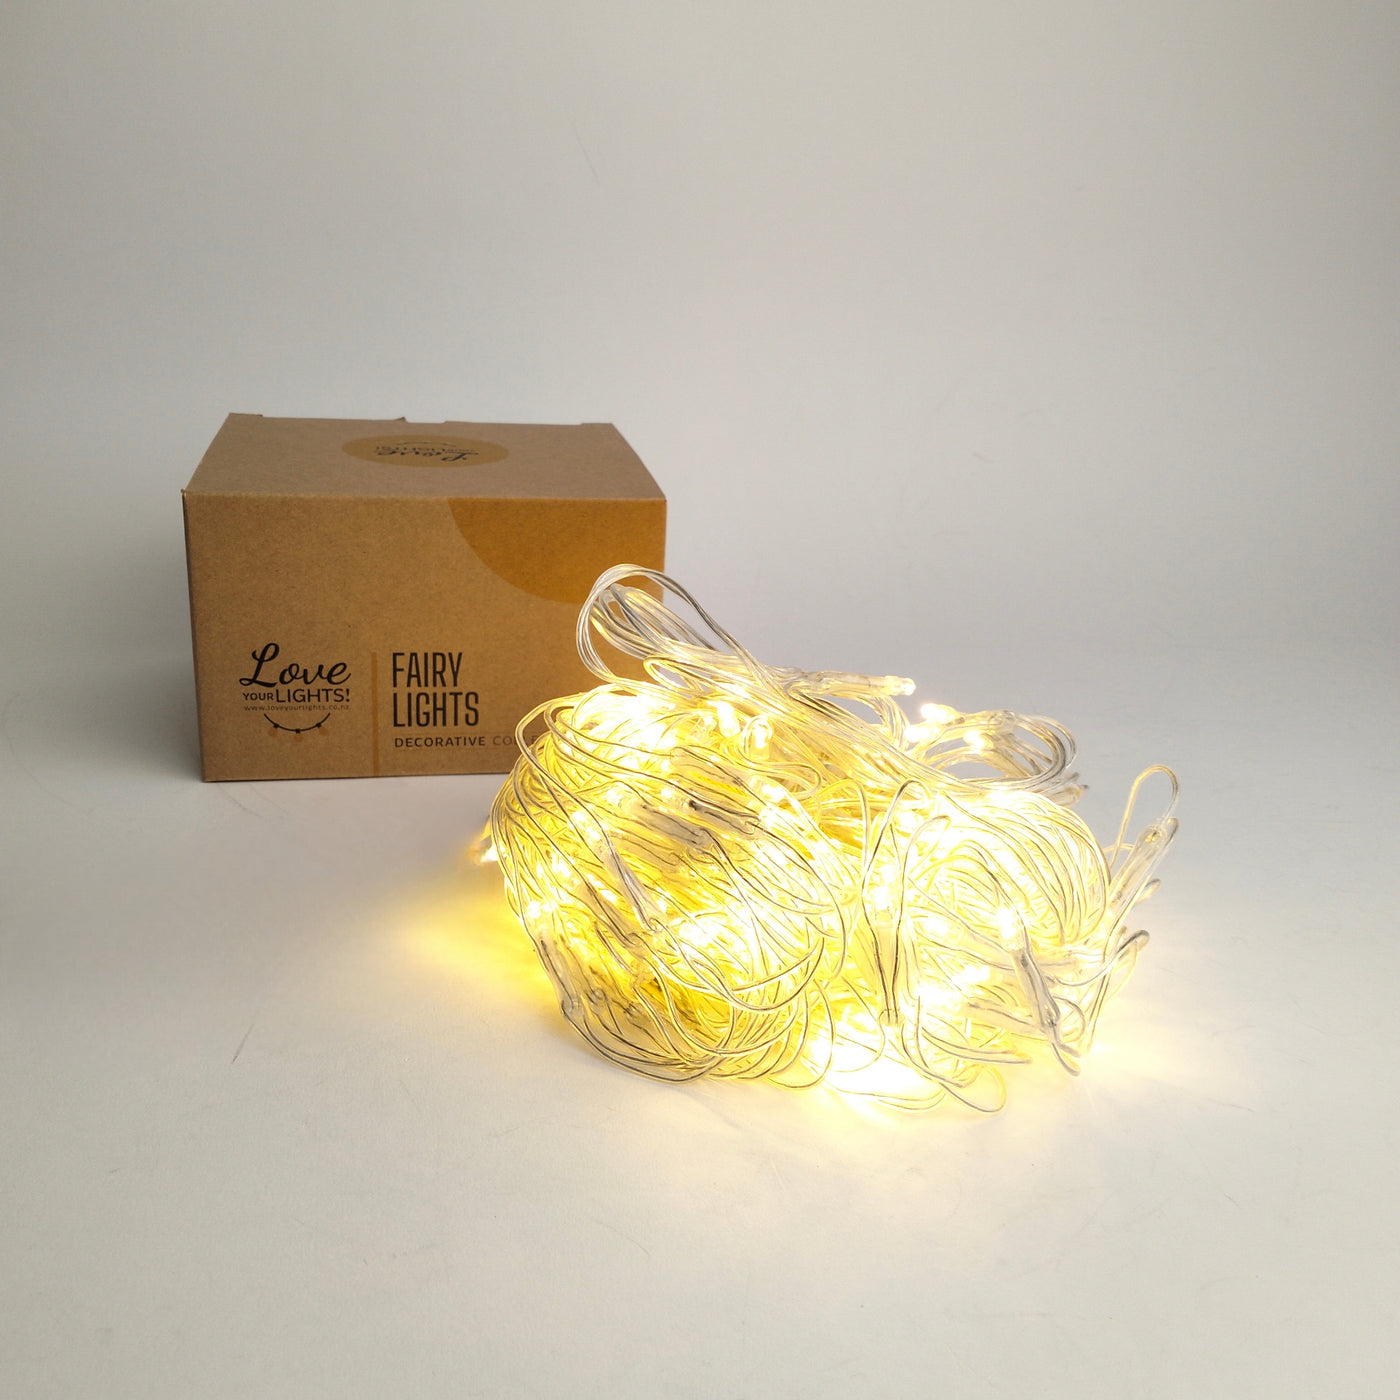 Net Fairy Lights | Core Series | Clear PVC 2m x 3m | Connectable | Indoor & Outdoor